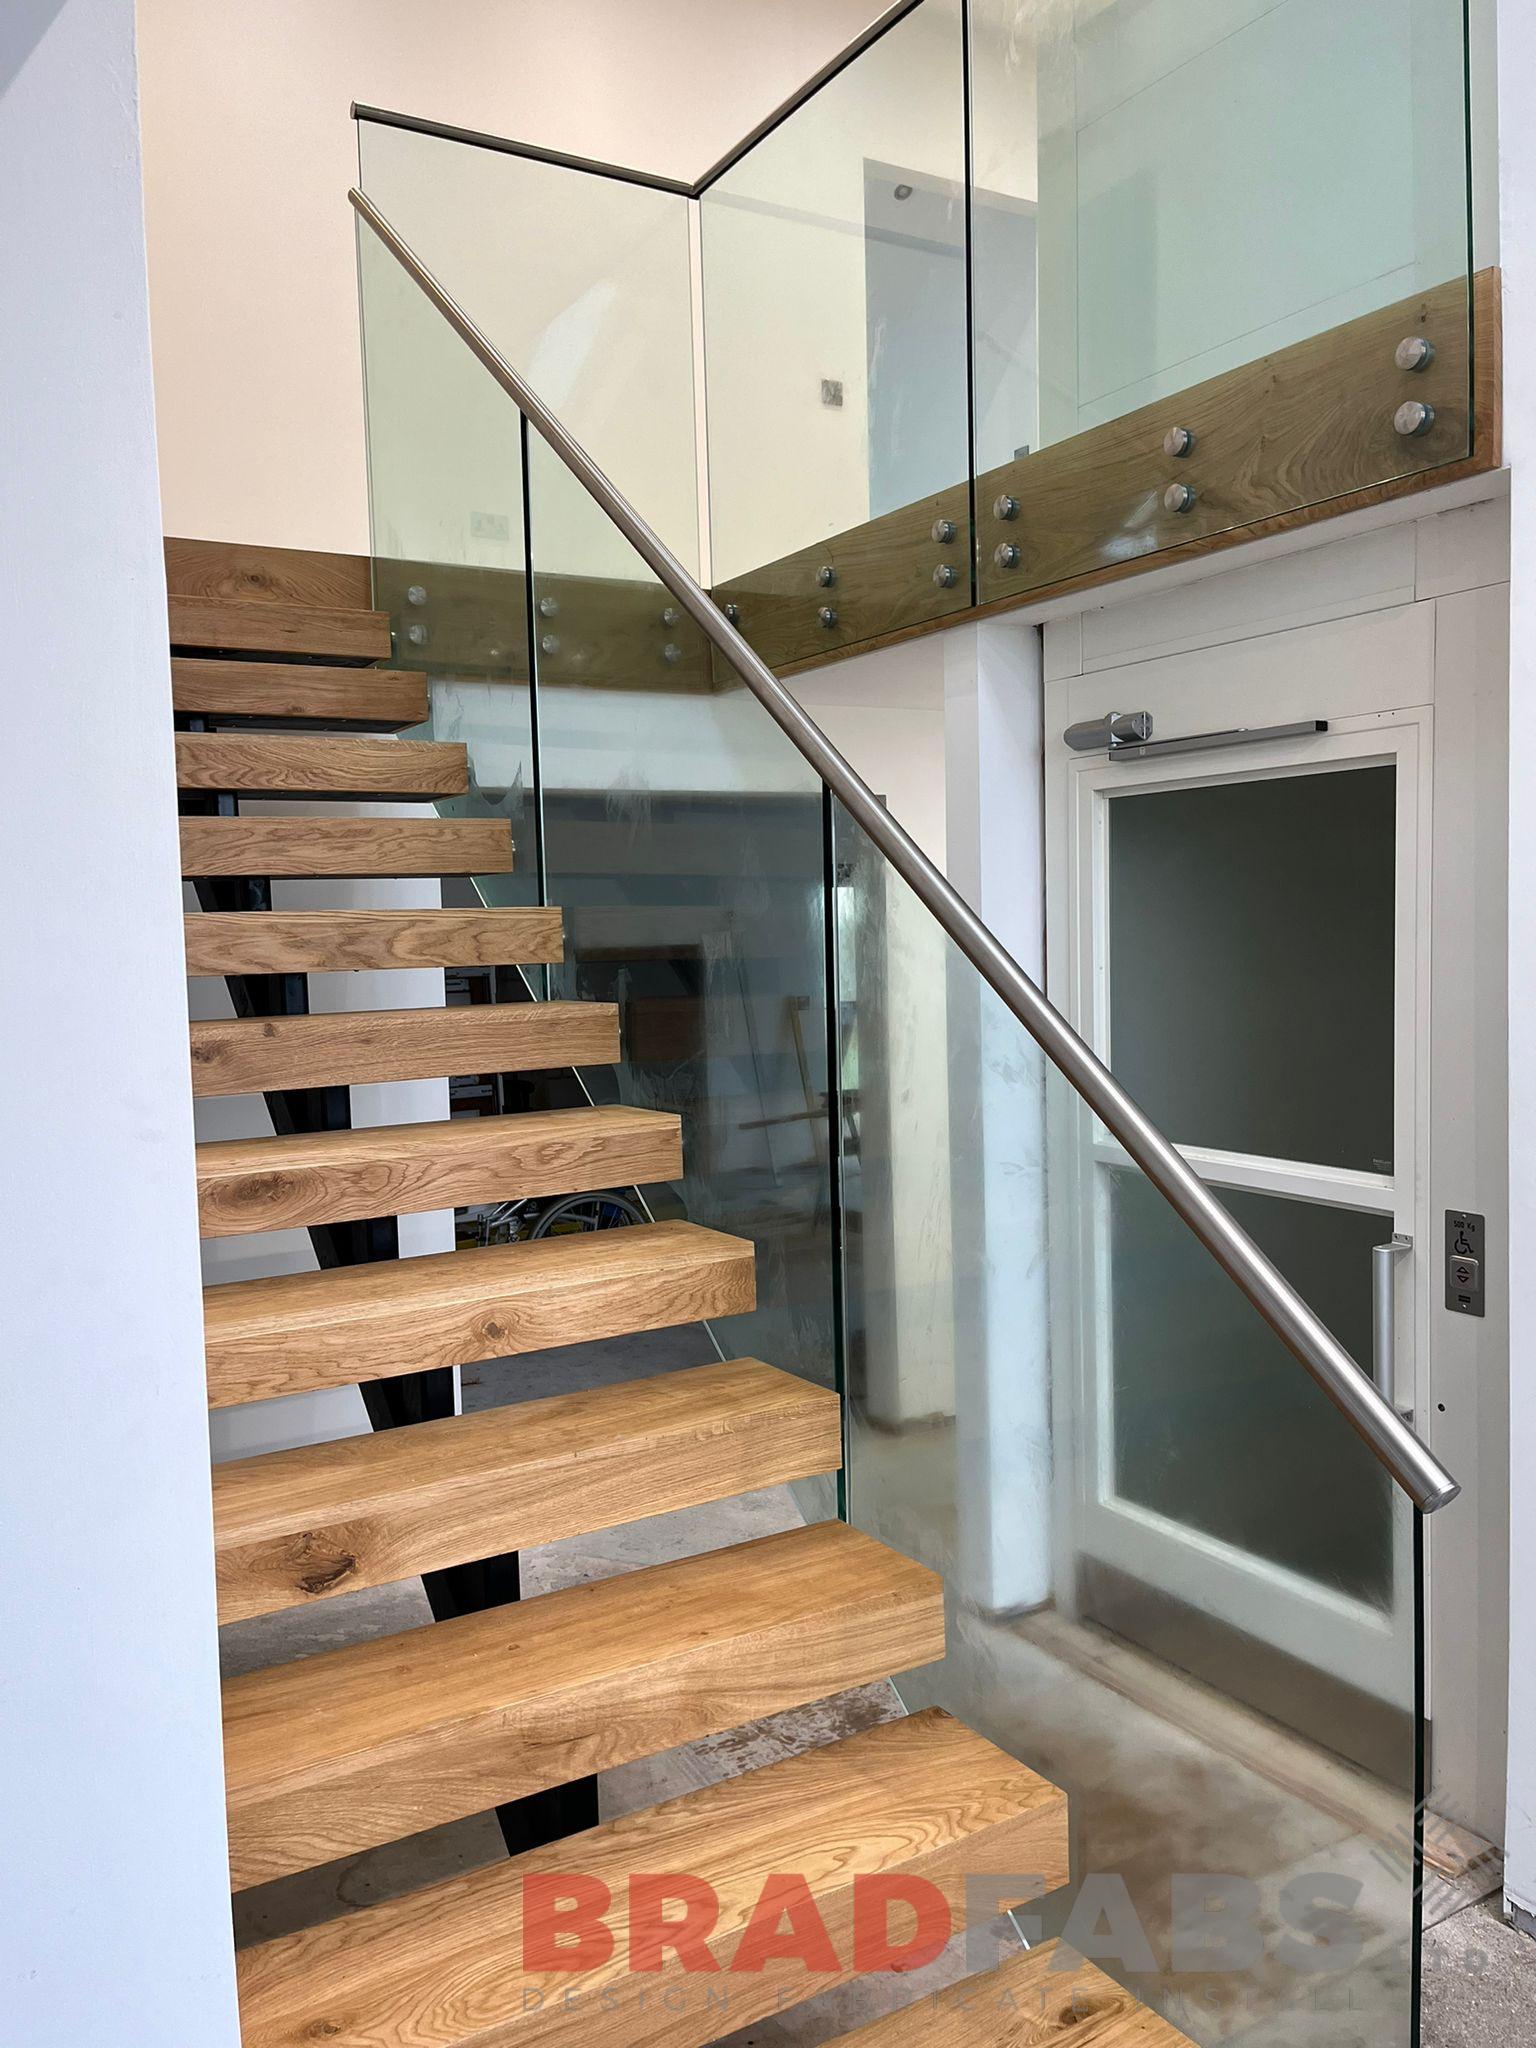 Bradfabs staircase, internal staircase with glass balustrade and oak treads 